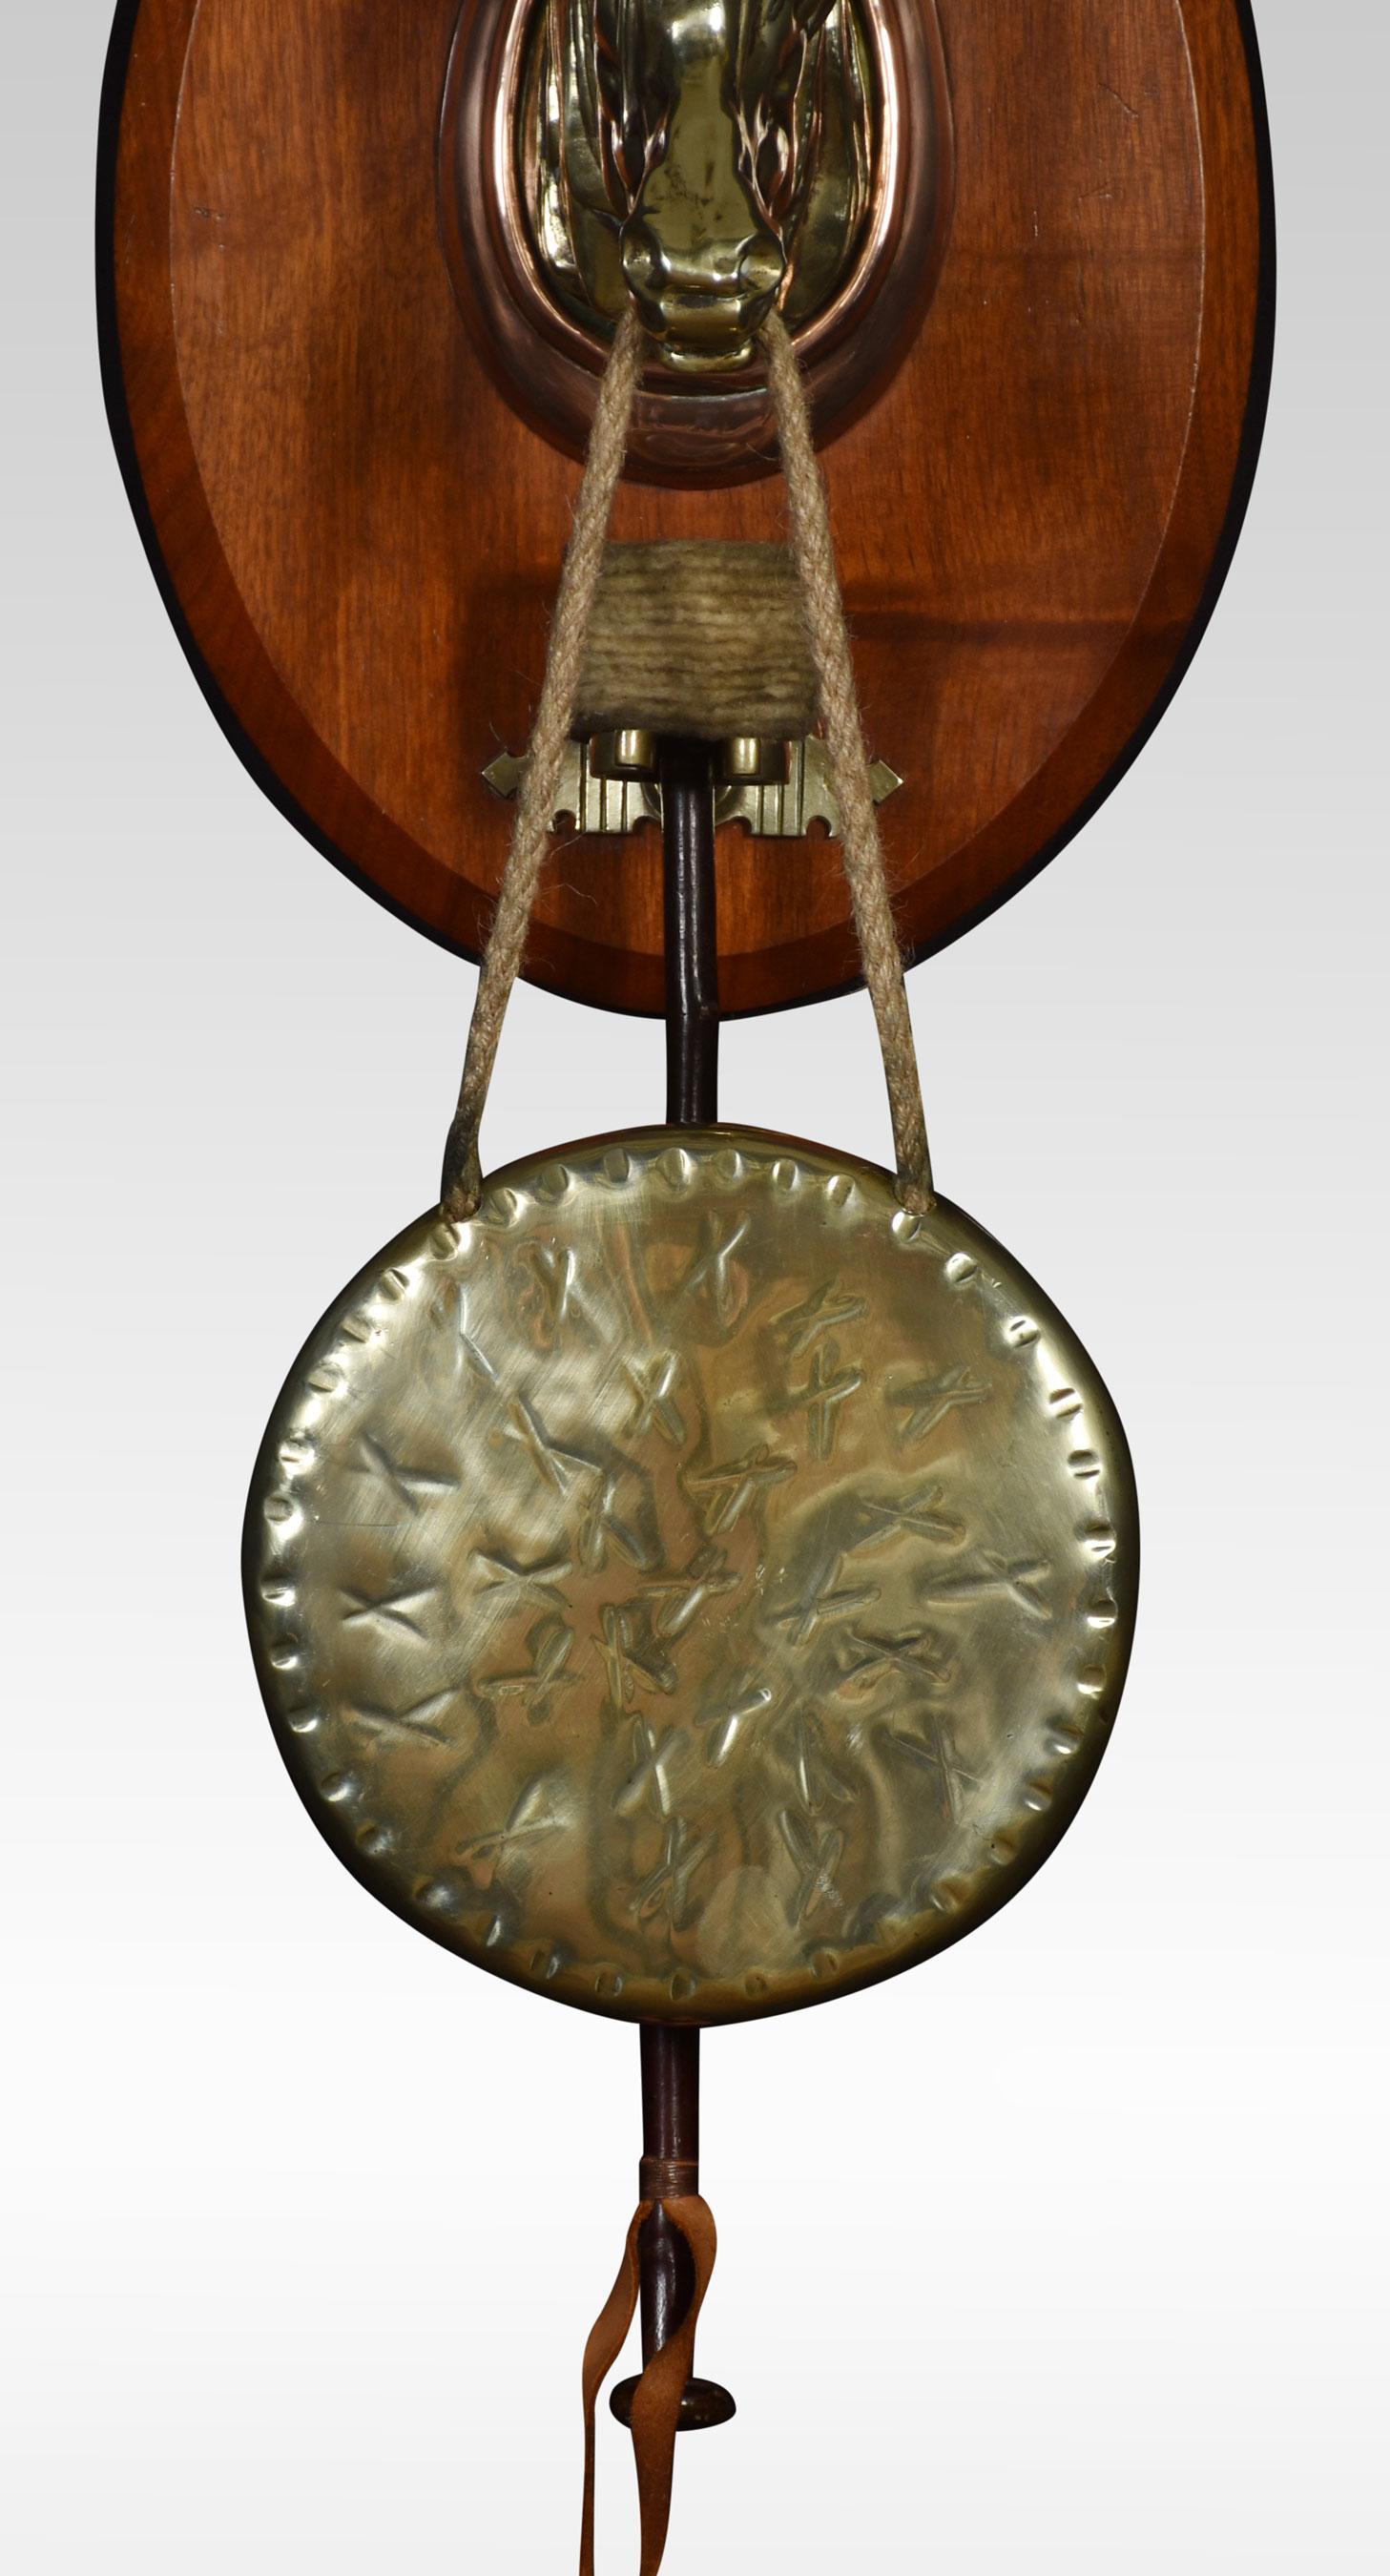 Wall hanging dinner gong, the mahogany backplate mounted with brass horse head supporting the circular gong. Together with a hammer.
Dimensions
Measures: Height 27 Inches
Width 10.5 Inches
Depth 7.5 Inches.